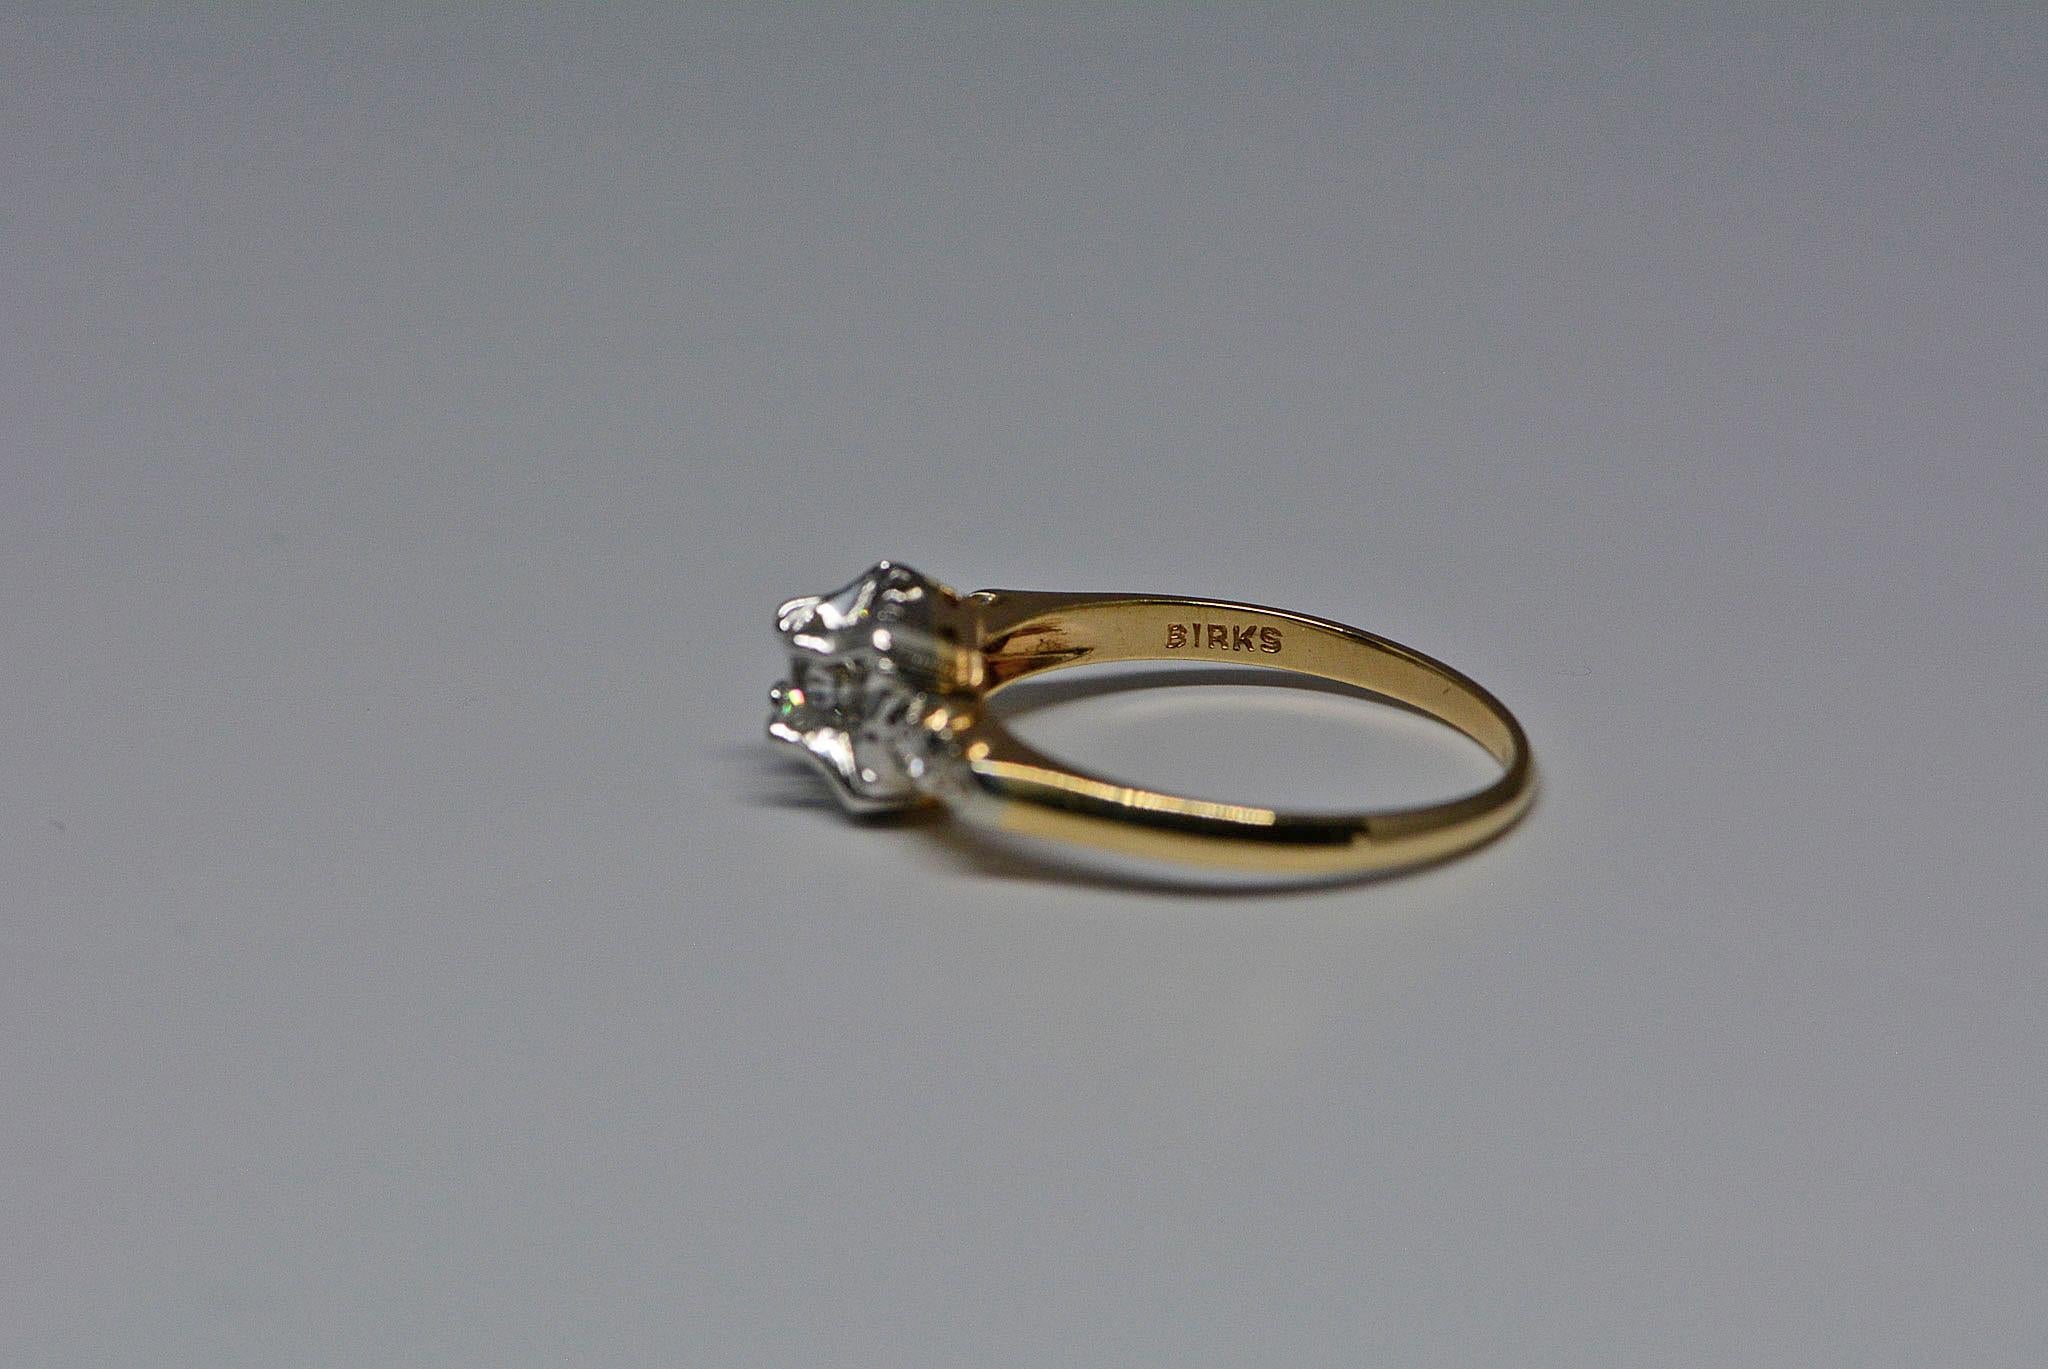 GIA Certified 0.24 Carat Diamond Platinum and Yellow Gold Ring by Birks For Sale 2